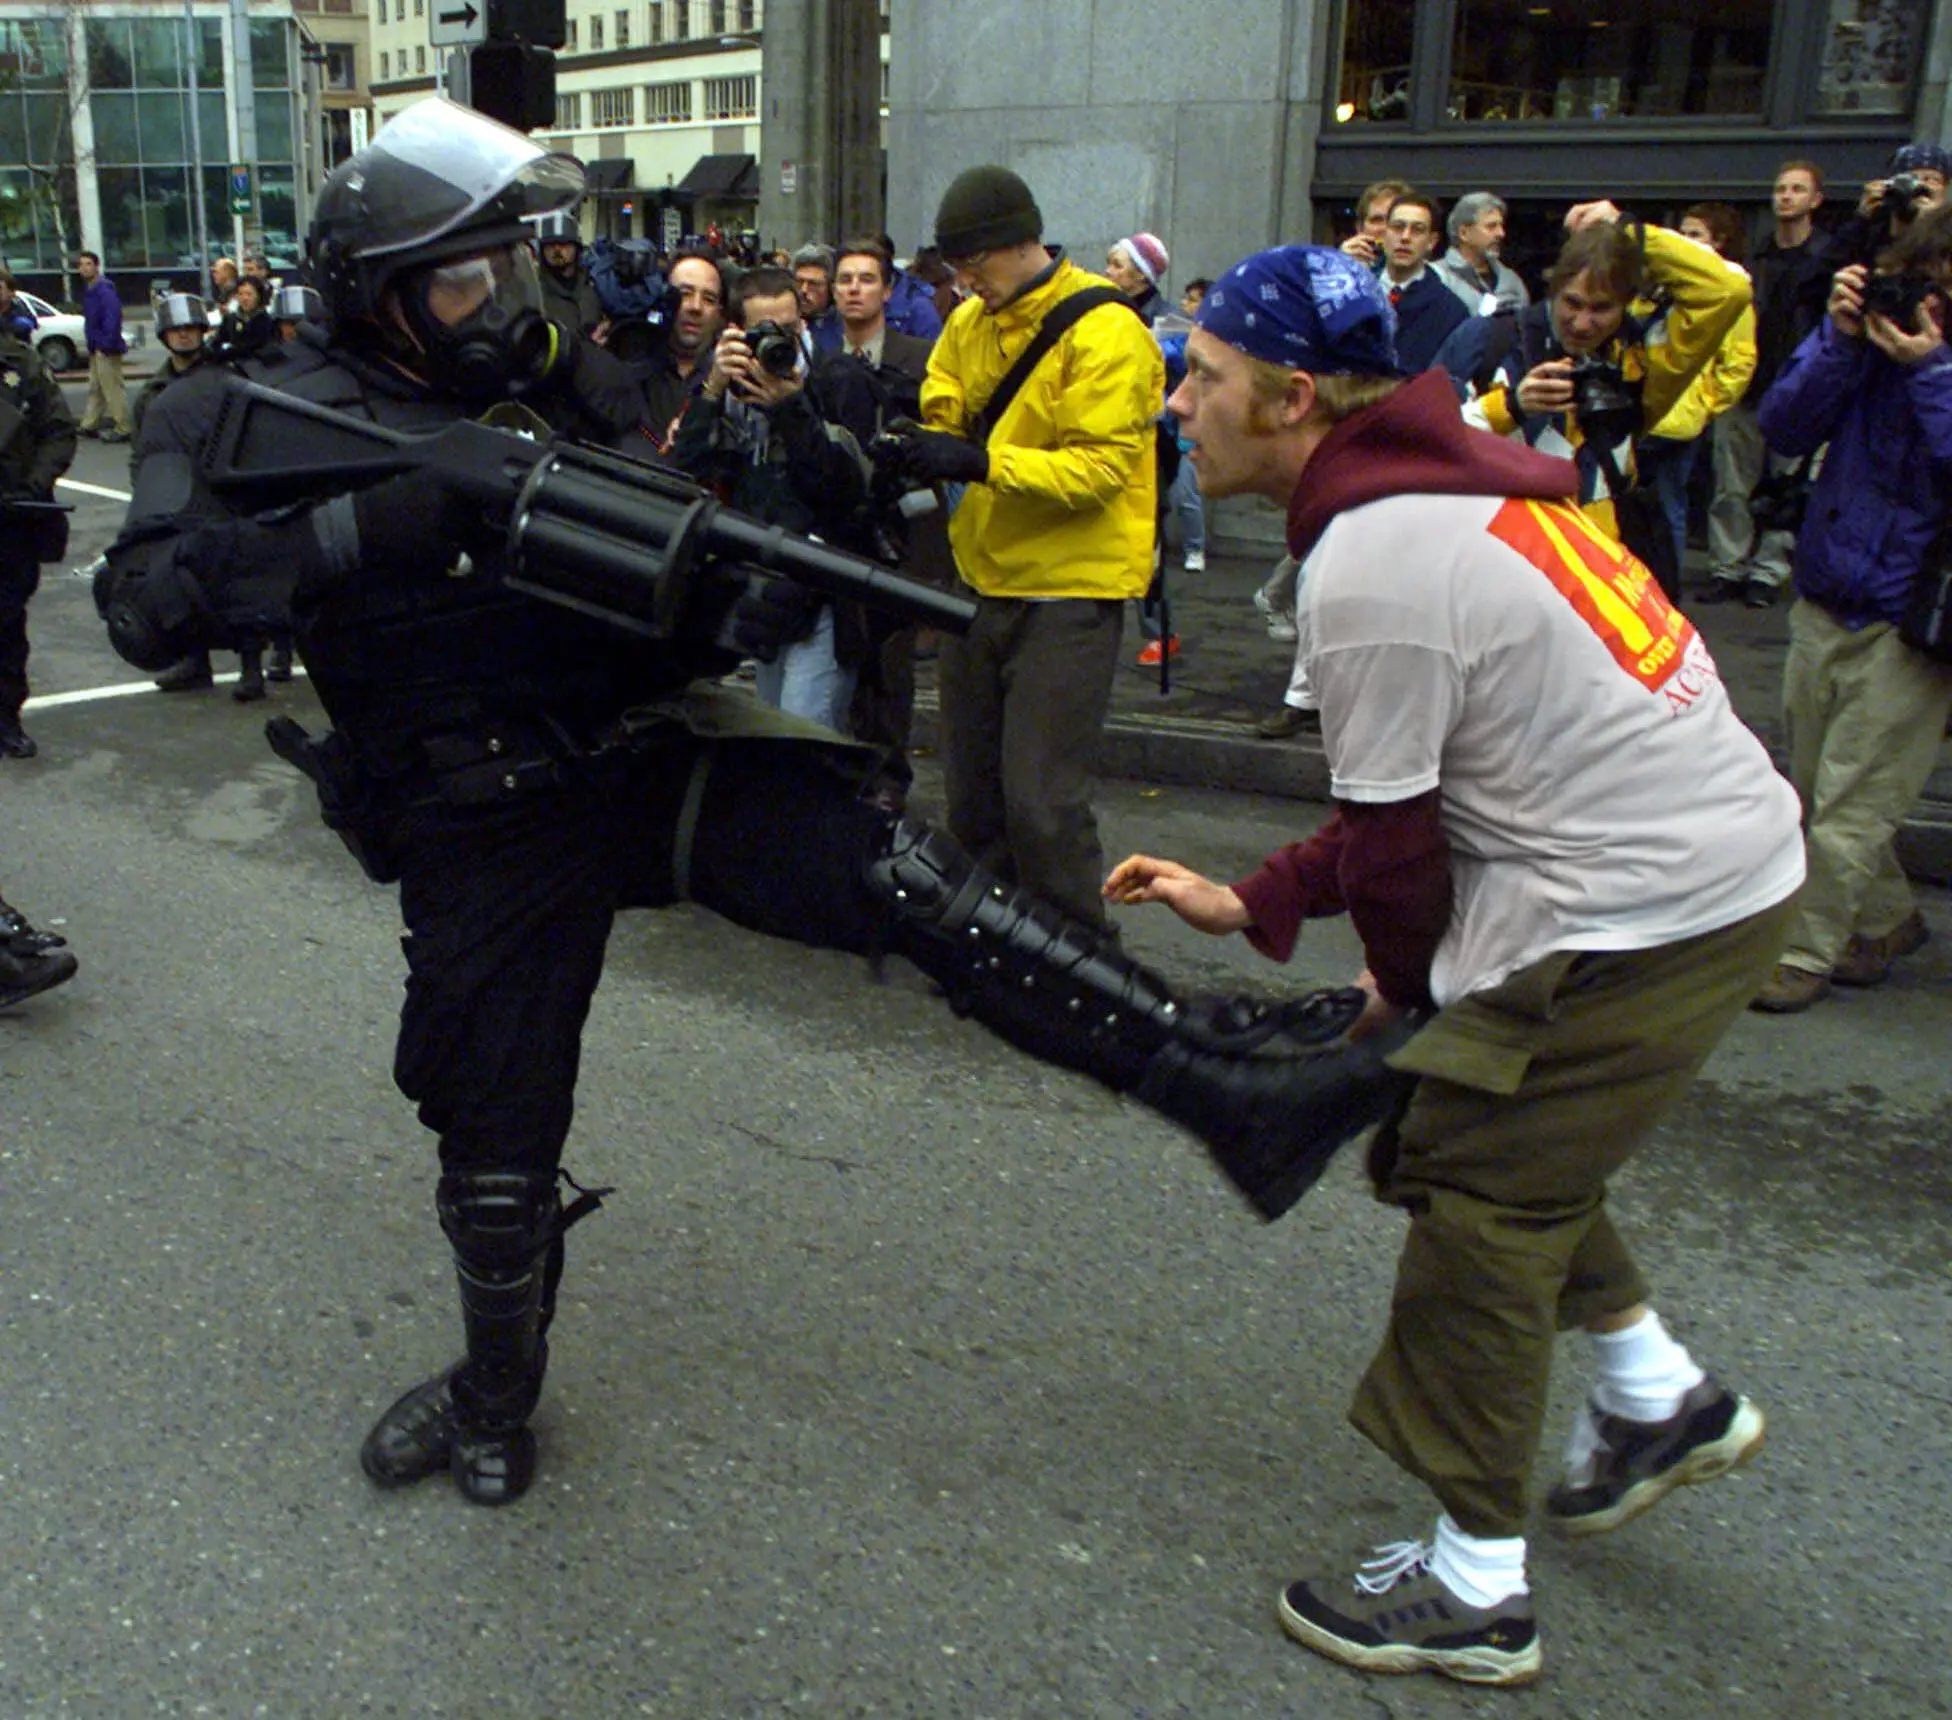 A heavily-armored officer points a large gun at a protester while kicking them.